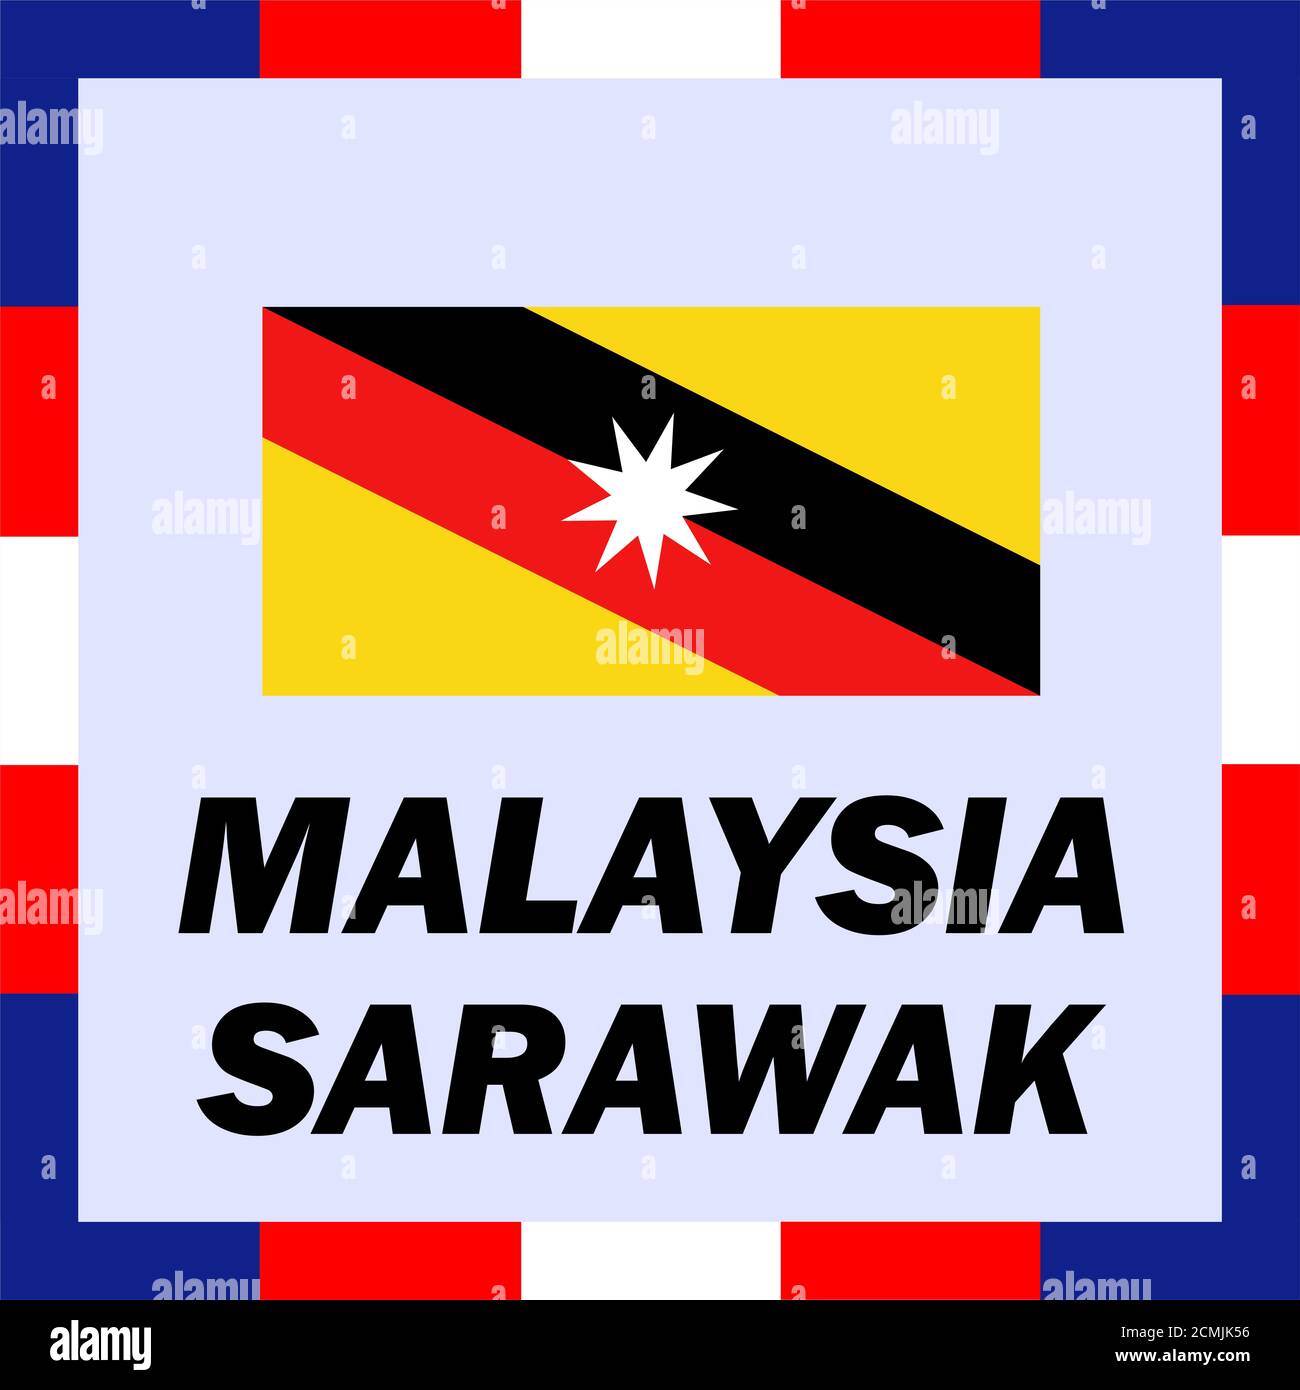 Official ensigns, flag and coat of arm of Malaysia - Sarawak Stock Photo